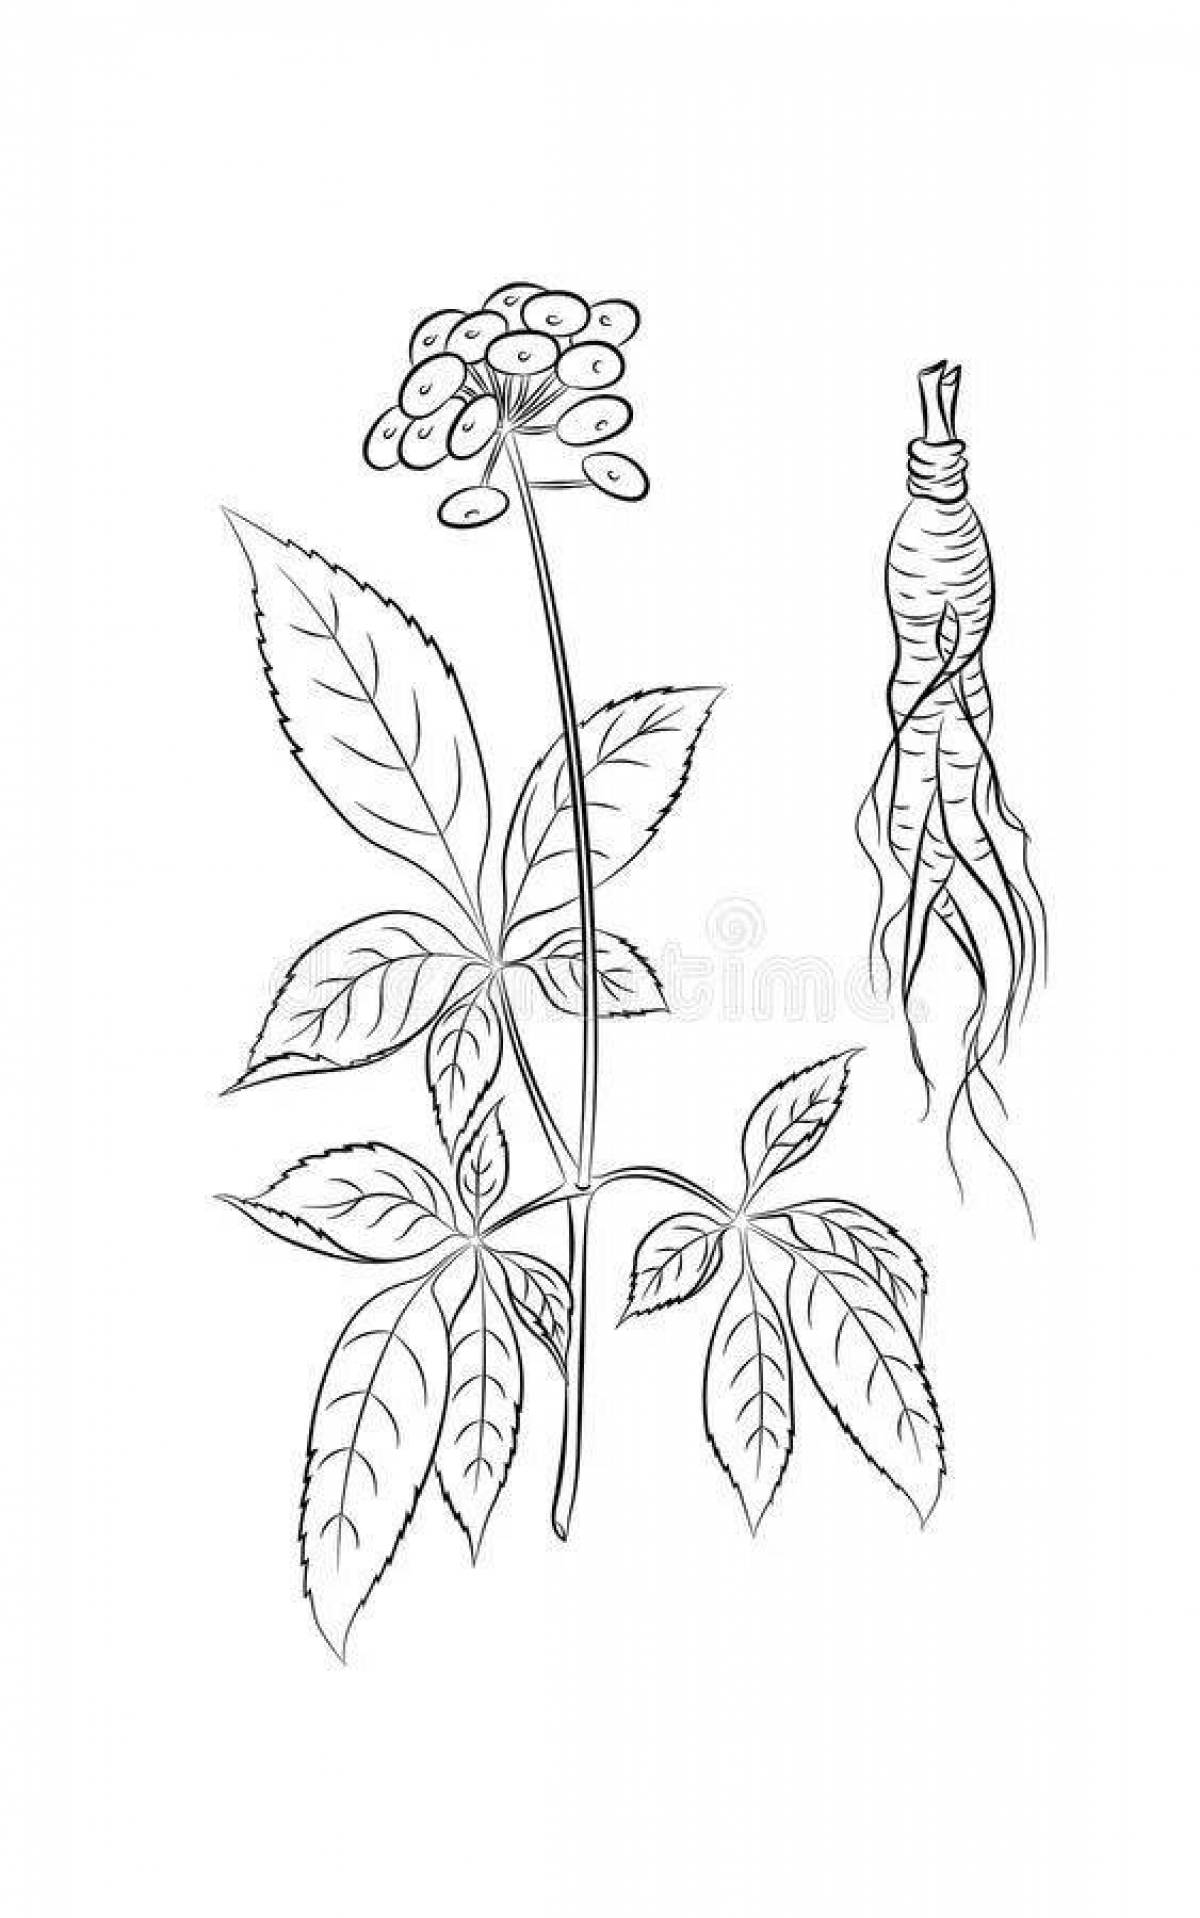 Animated ginseng coloring page